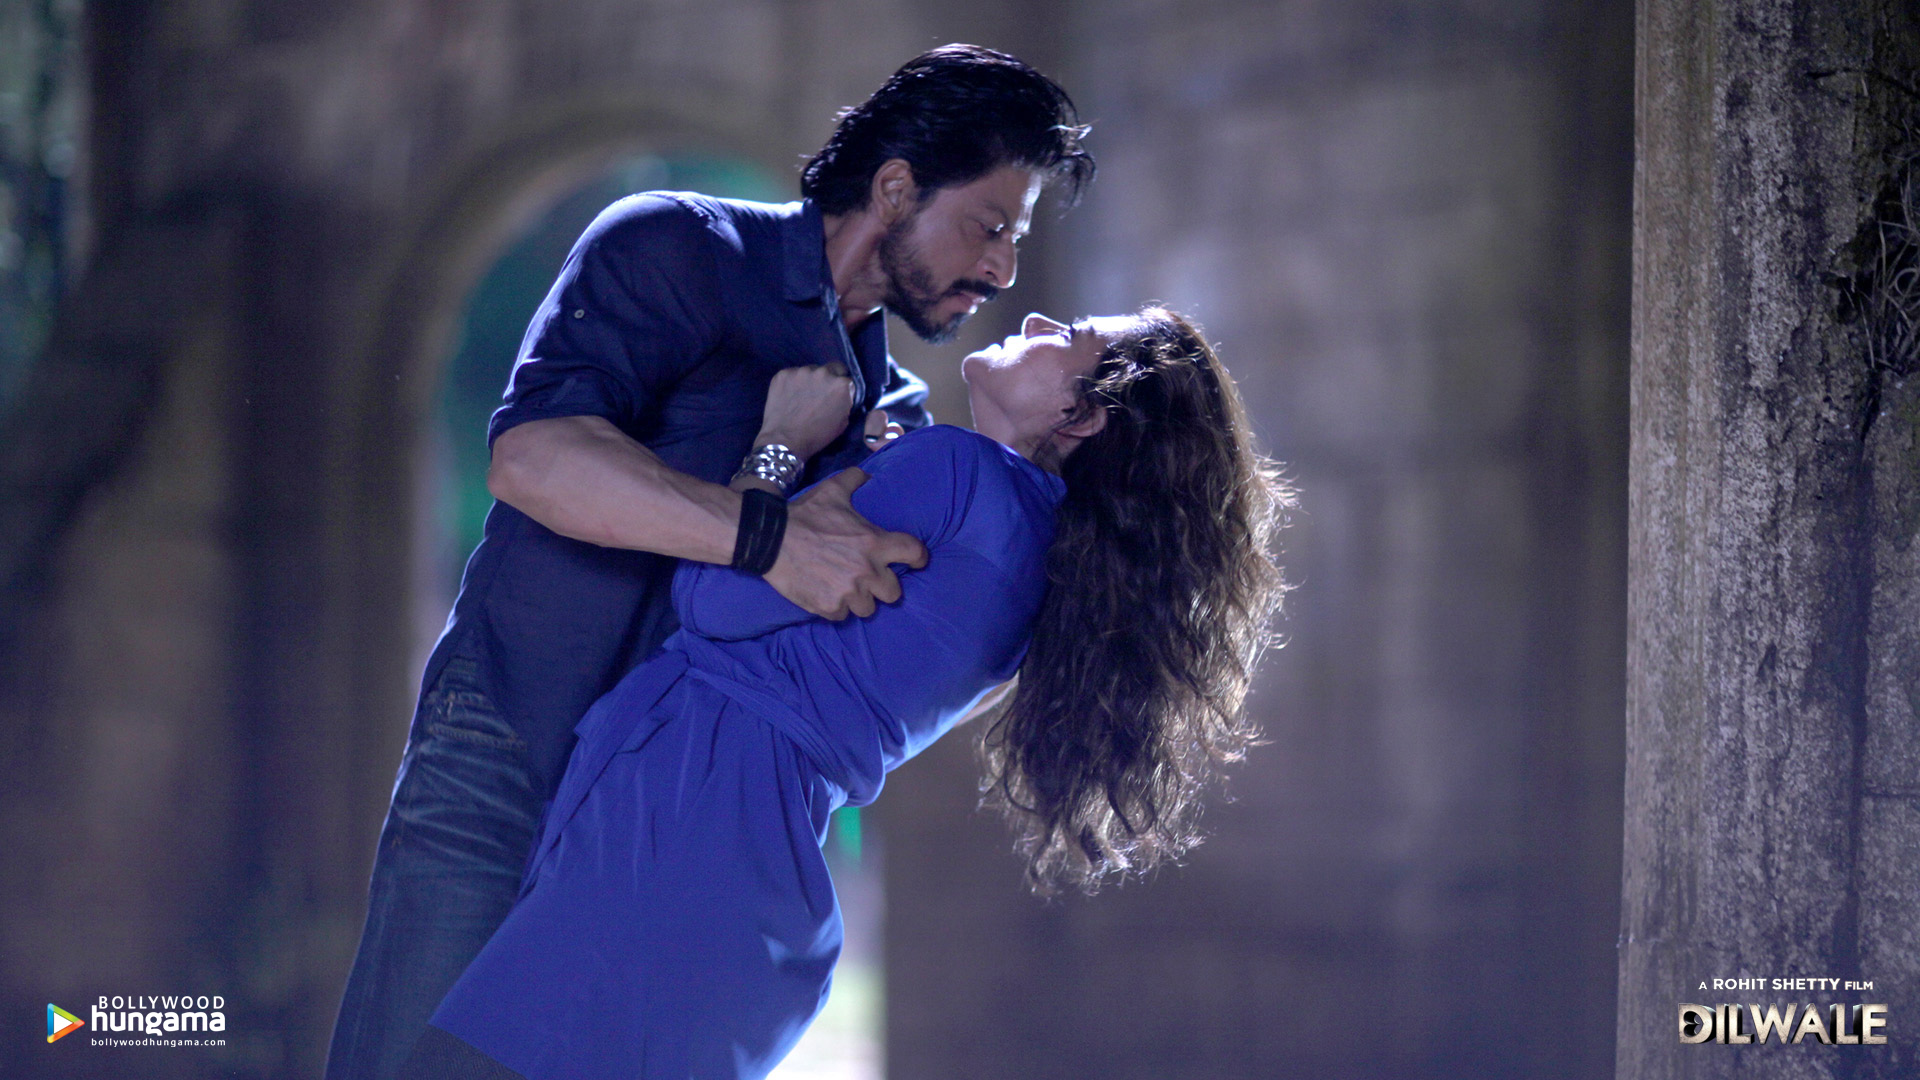 Dilwale Wallpaper Bollywood Hungama